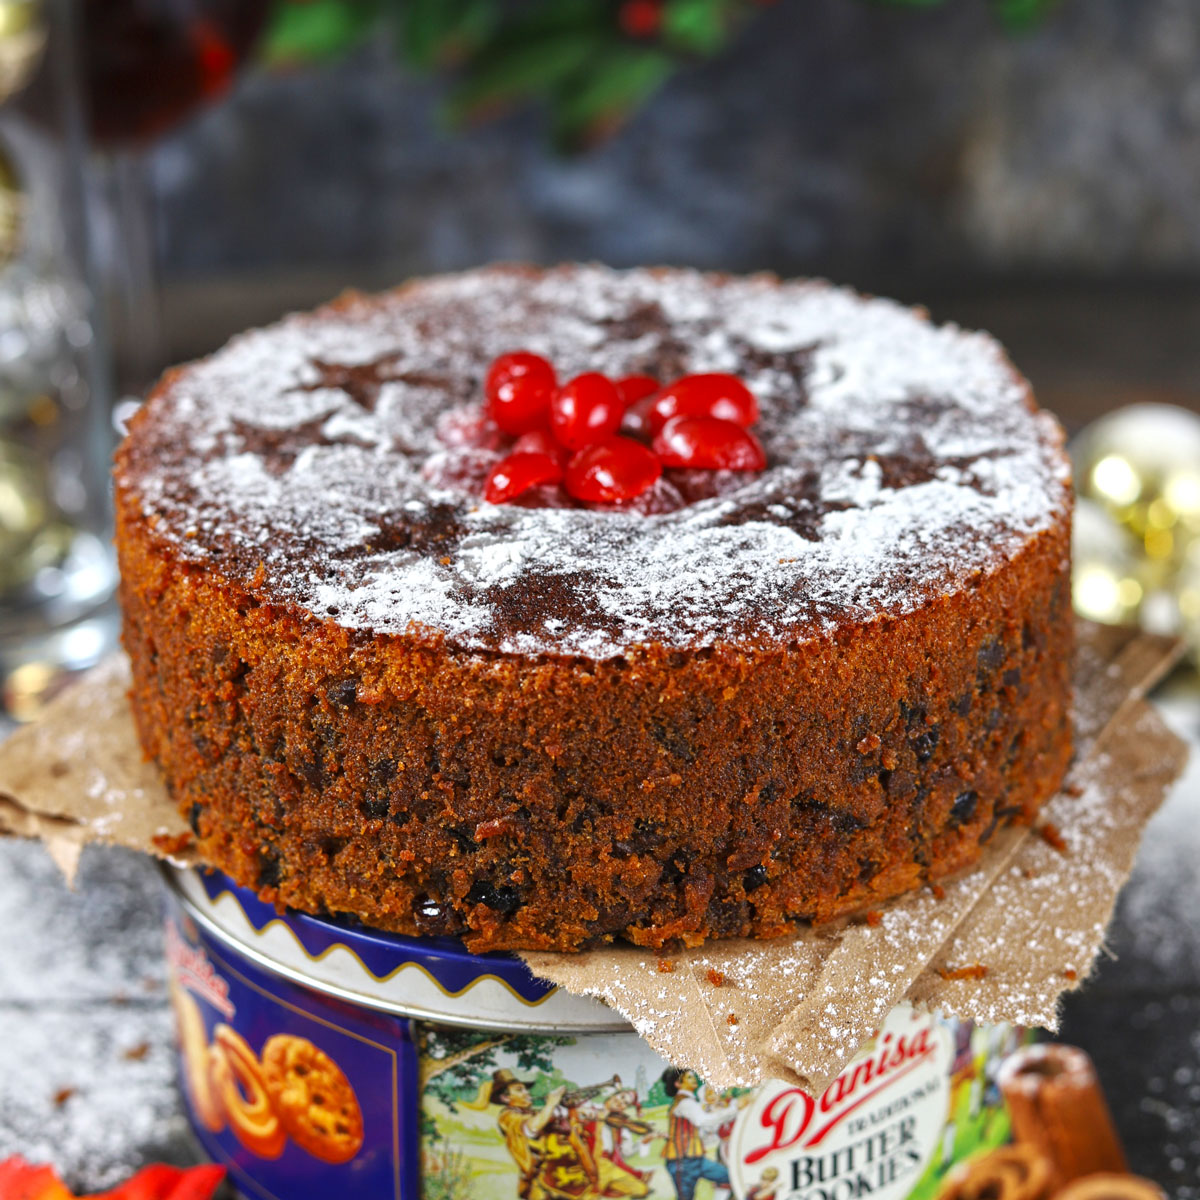 Whip up rum-soaked cake this Christmas, here's rum fruit cake recipe